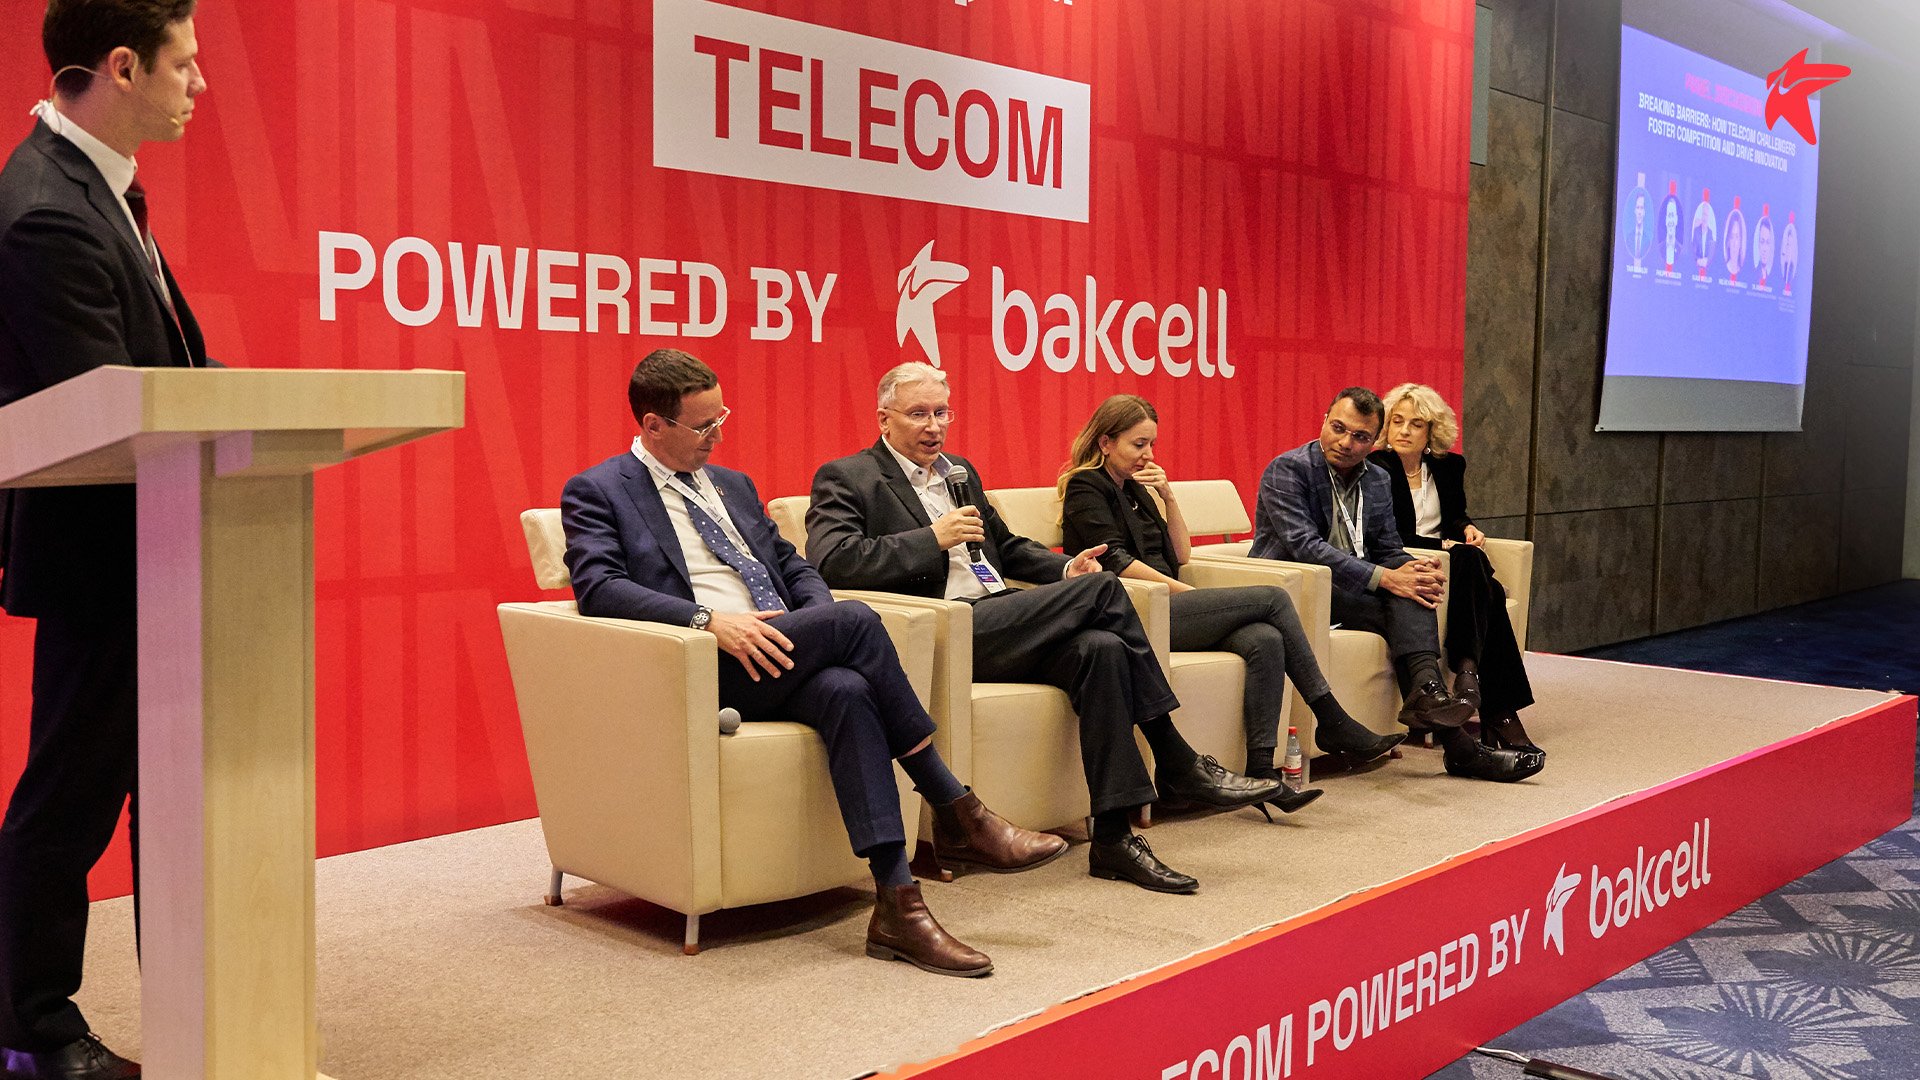 Innovation Summit is being held with the sponsorship of Bakcell (PHOTO)